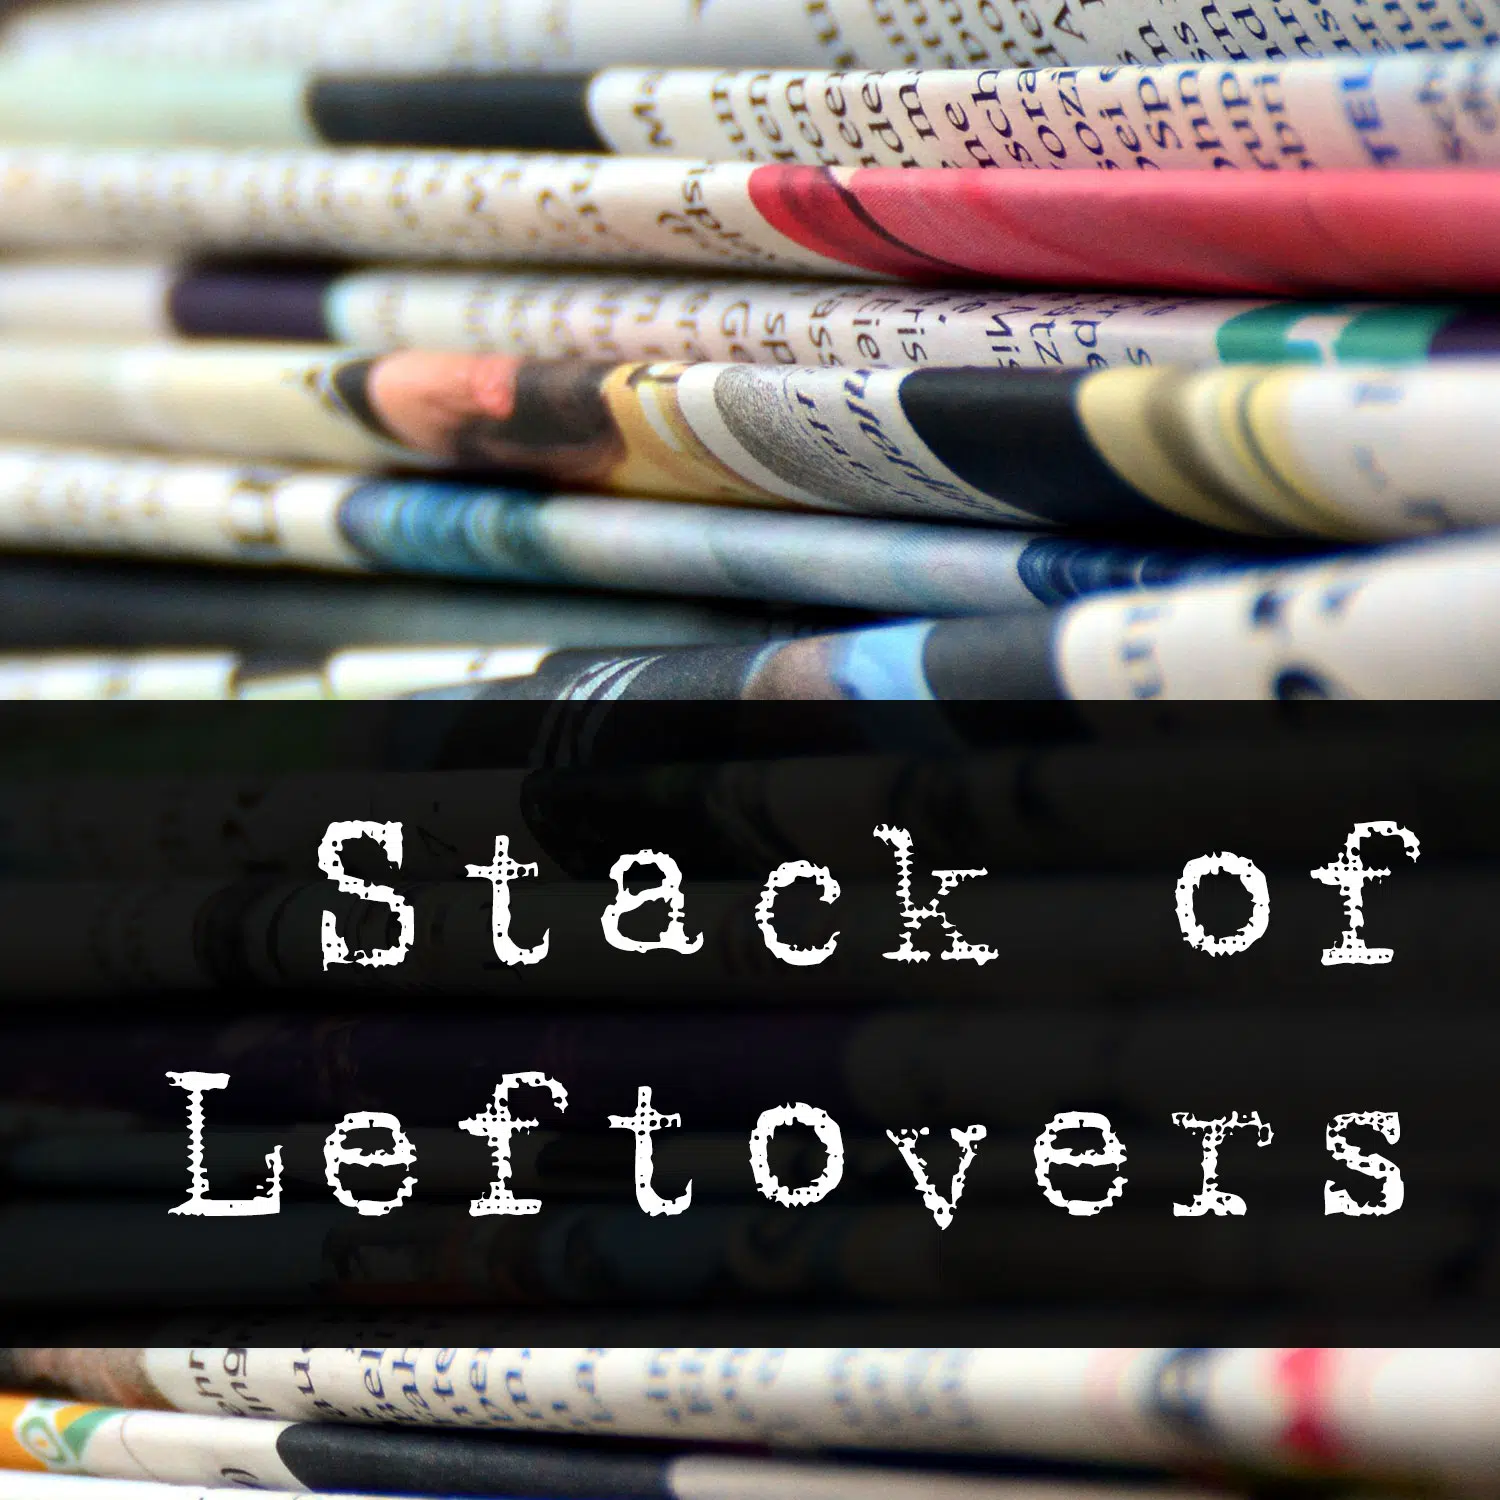 Stack of Leftovers